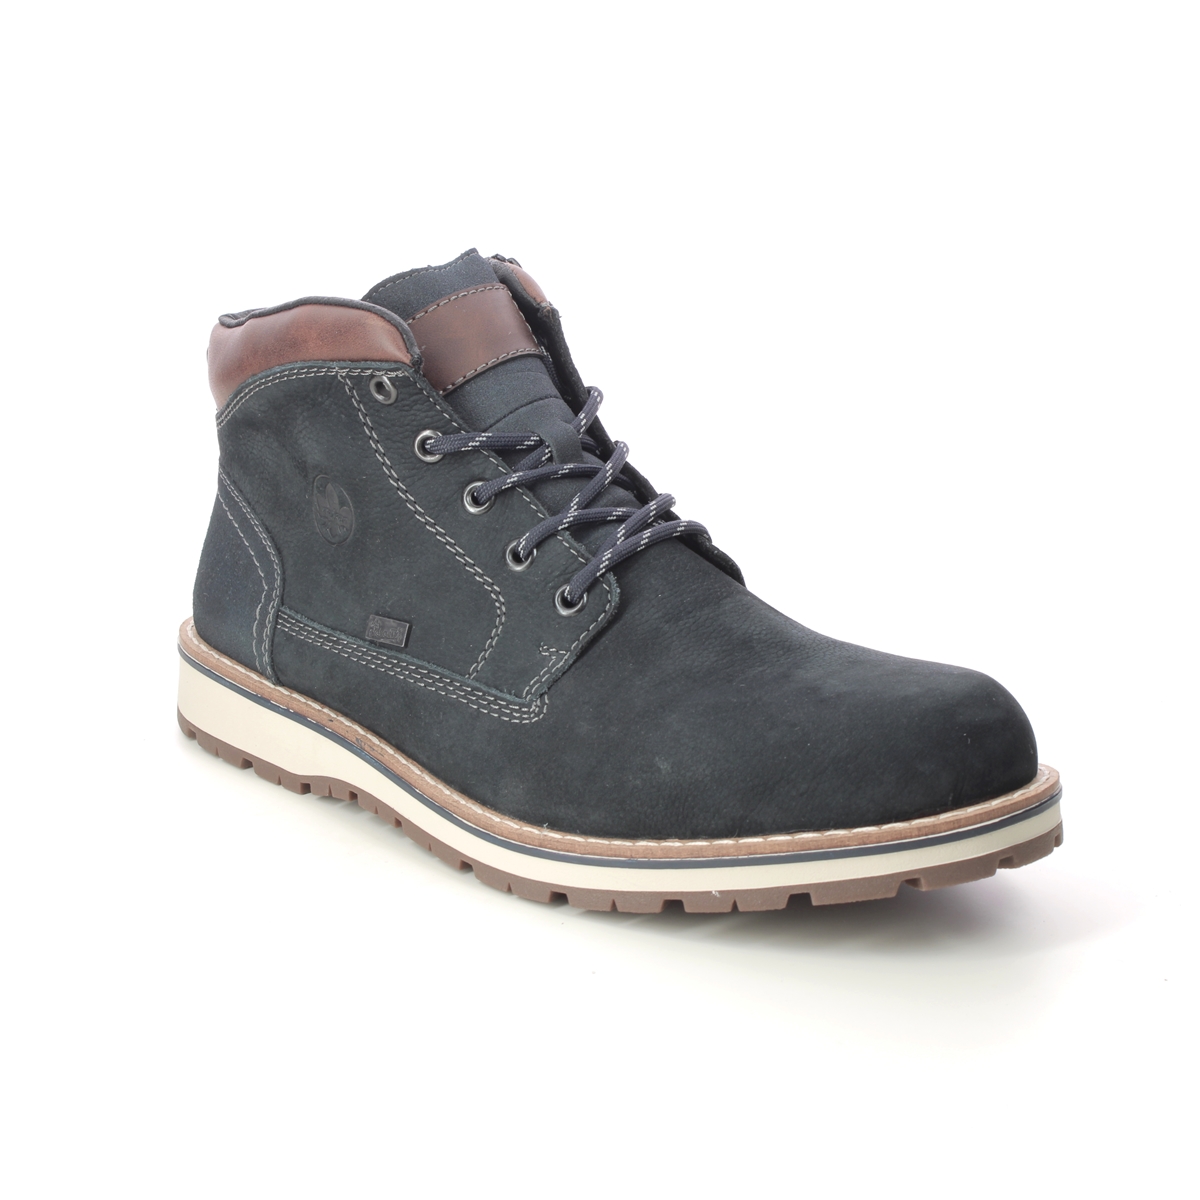 Rieker F8410-16 Navy Tan Mens boots in a Plain Leather in Size 45